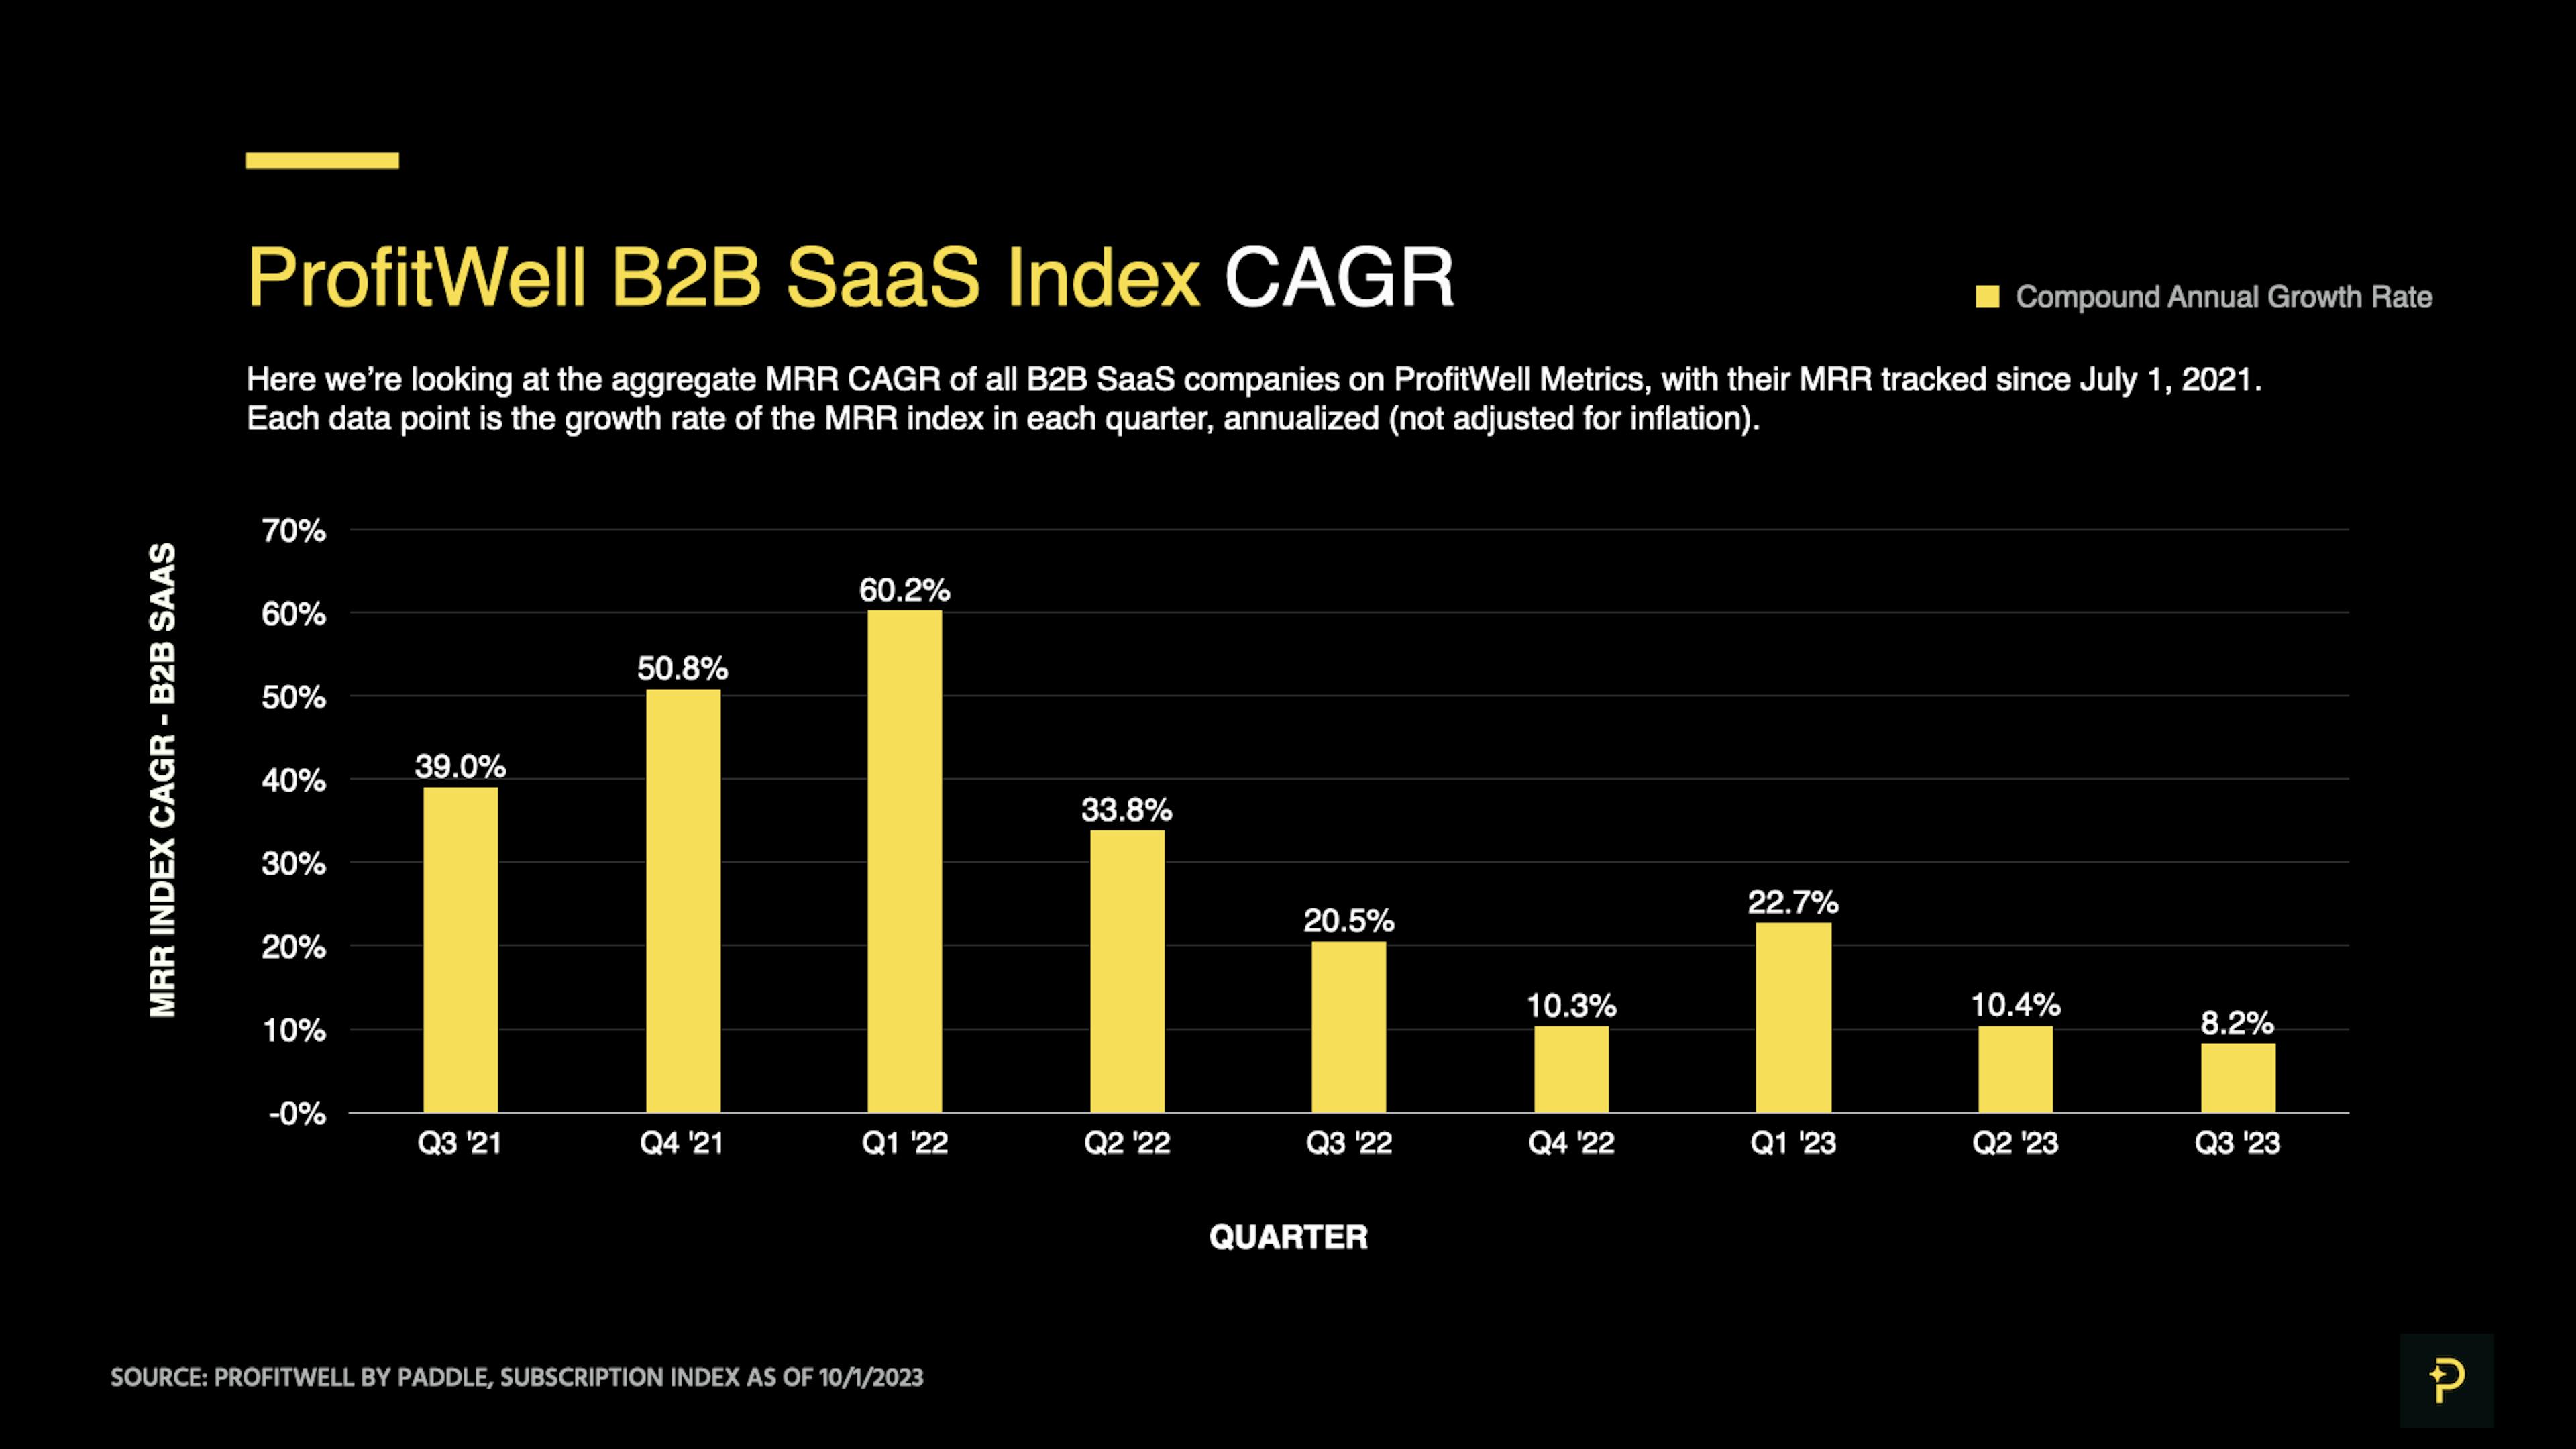 ProfitWell B2B SaaS Index as of October 1, 2023 - Compound Annual Growth Rate in MRR, Quarterly